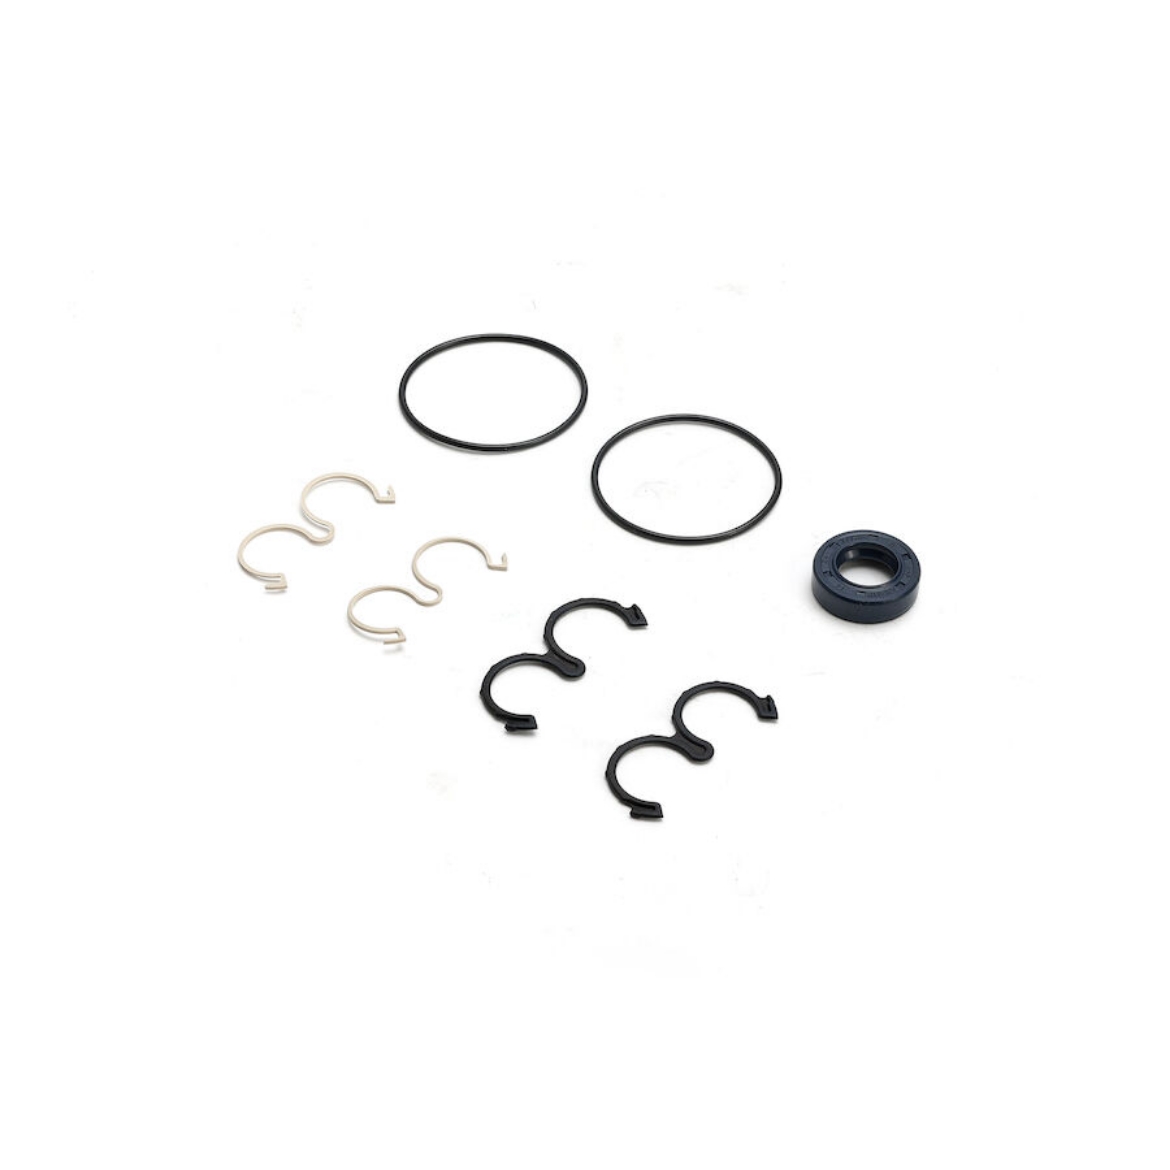 Picture of Seal Kit to Suit 105-9770 (Reel Motor Assembly)